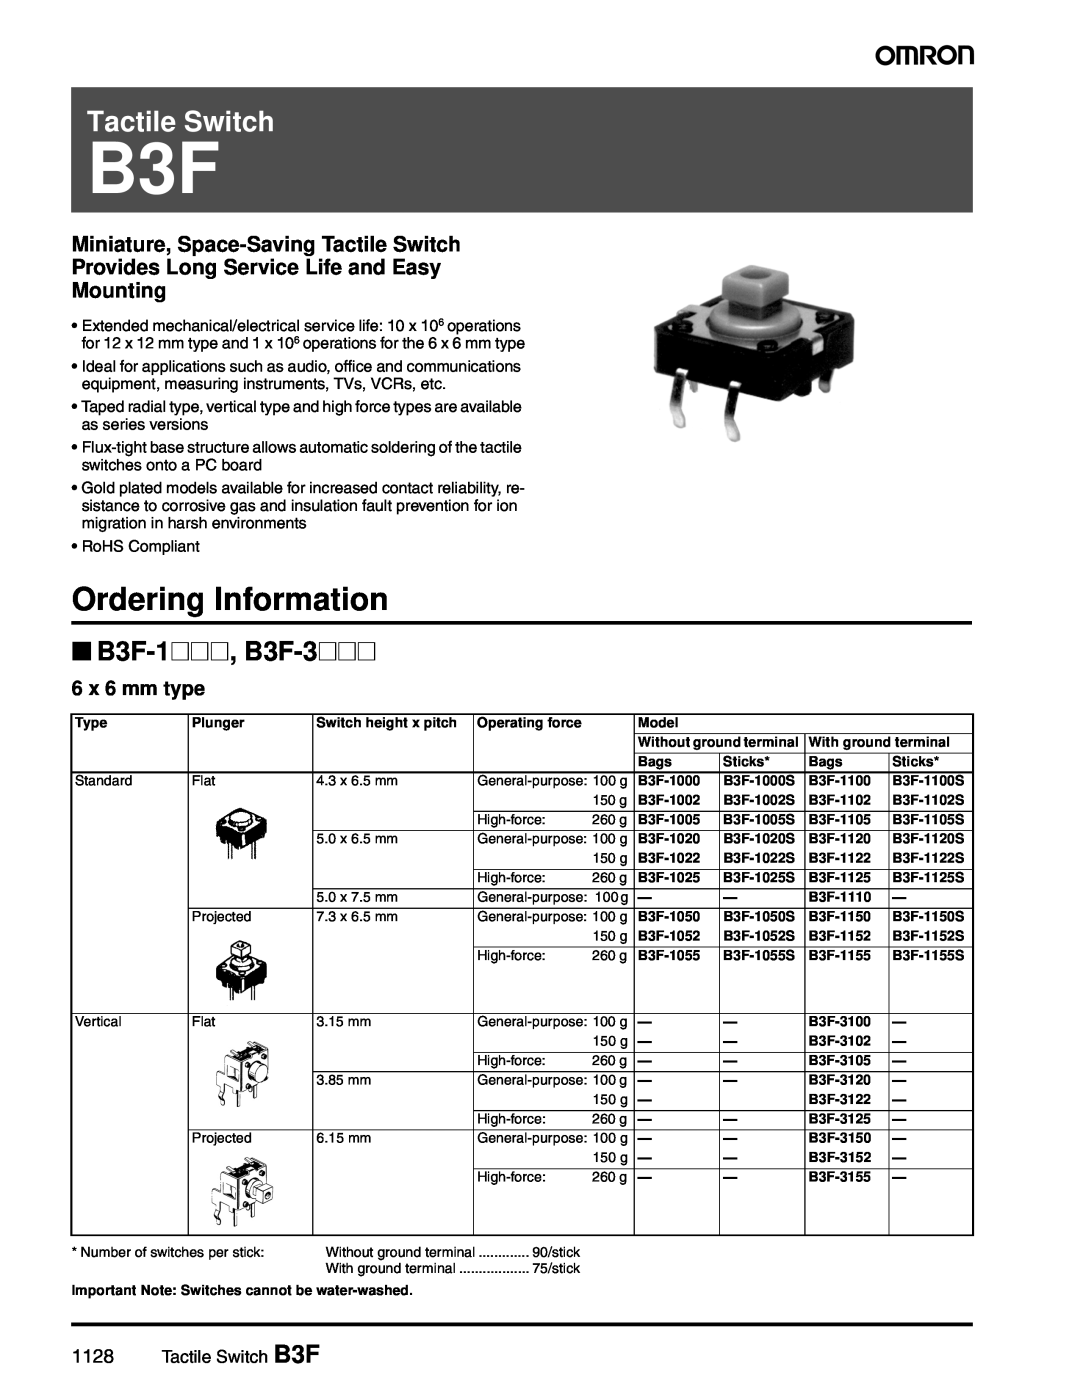 Omron manual Ordering Information, B3F-1@@@, B3F-3@@@, 6 x 6 mm type, Tactile Switch B3F 